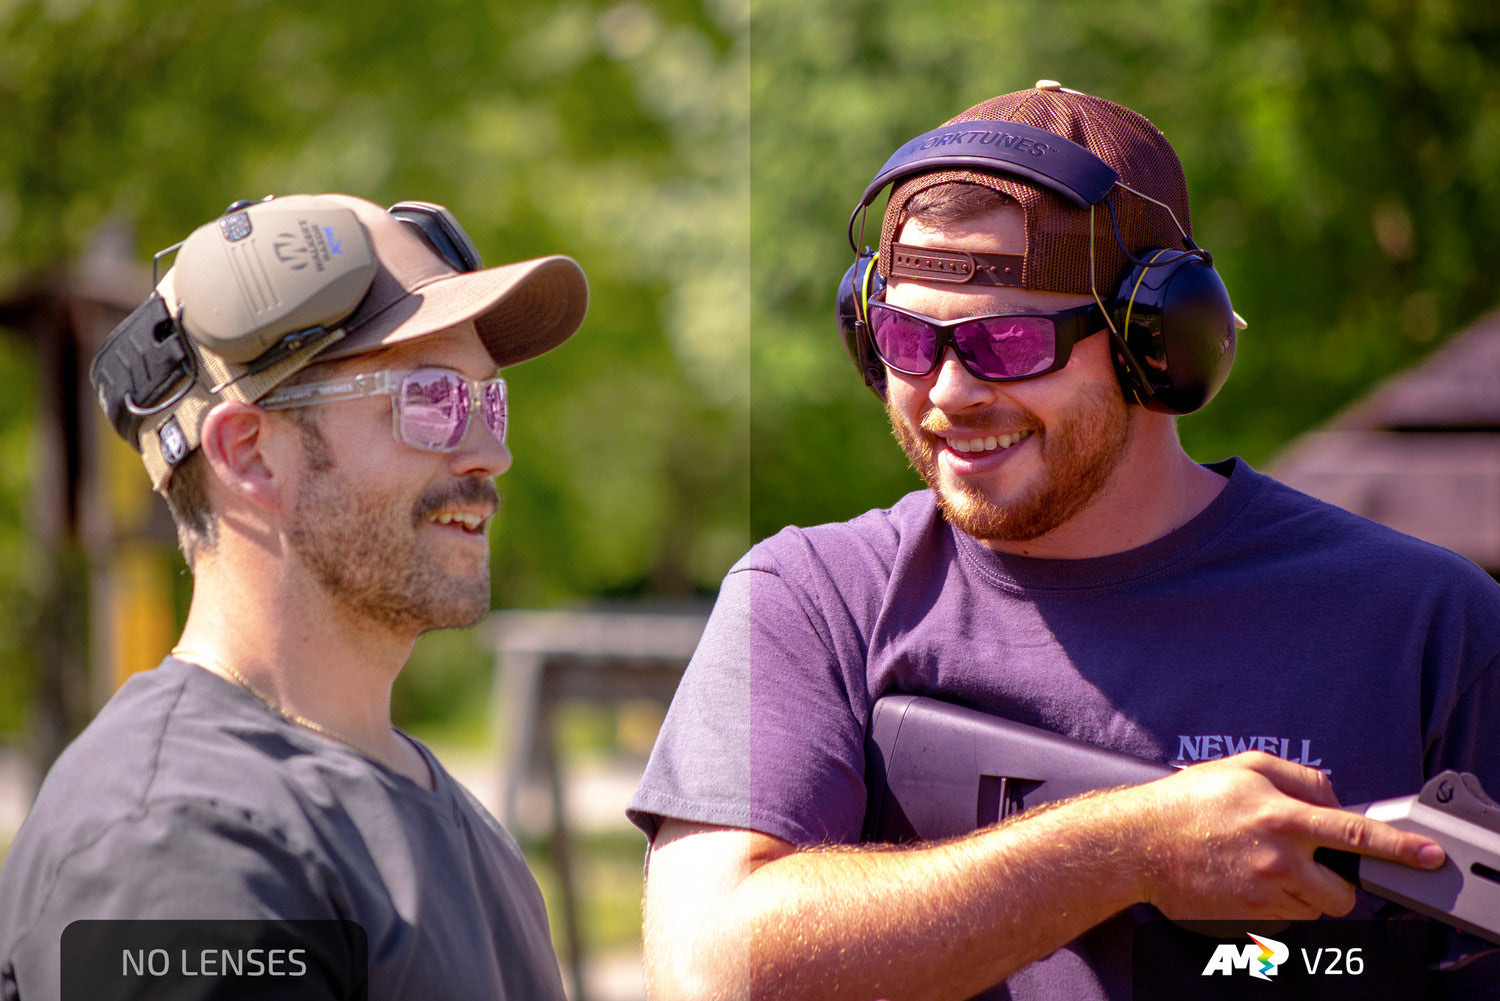 Split image of two men wearing purple-tinted AMP V26 sunglasses out target shooting. Comparison between normal view and view affected by AMP V26 lenses